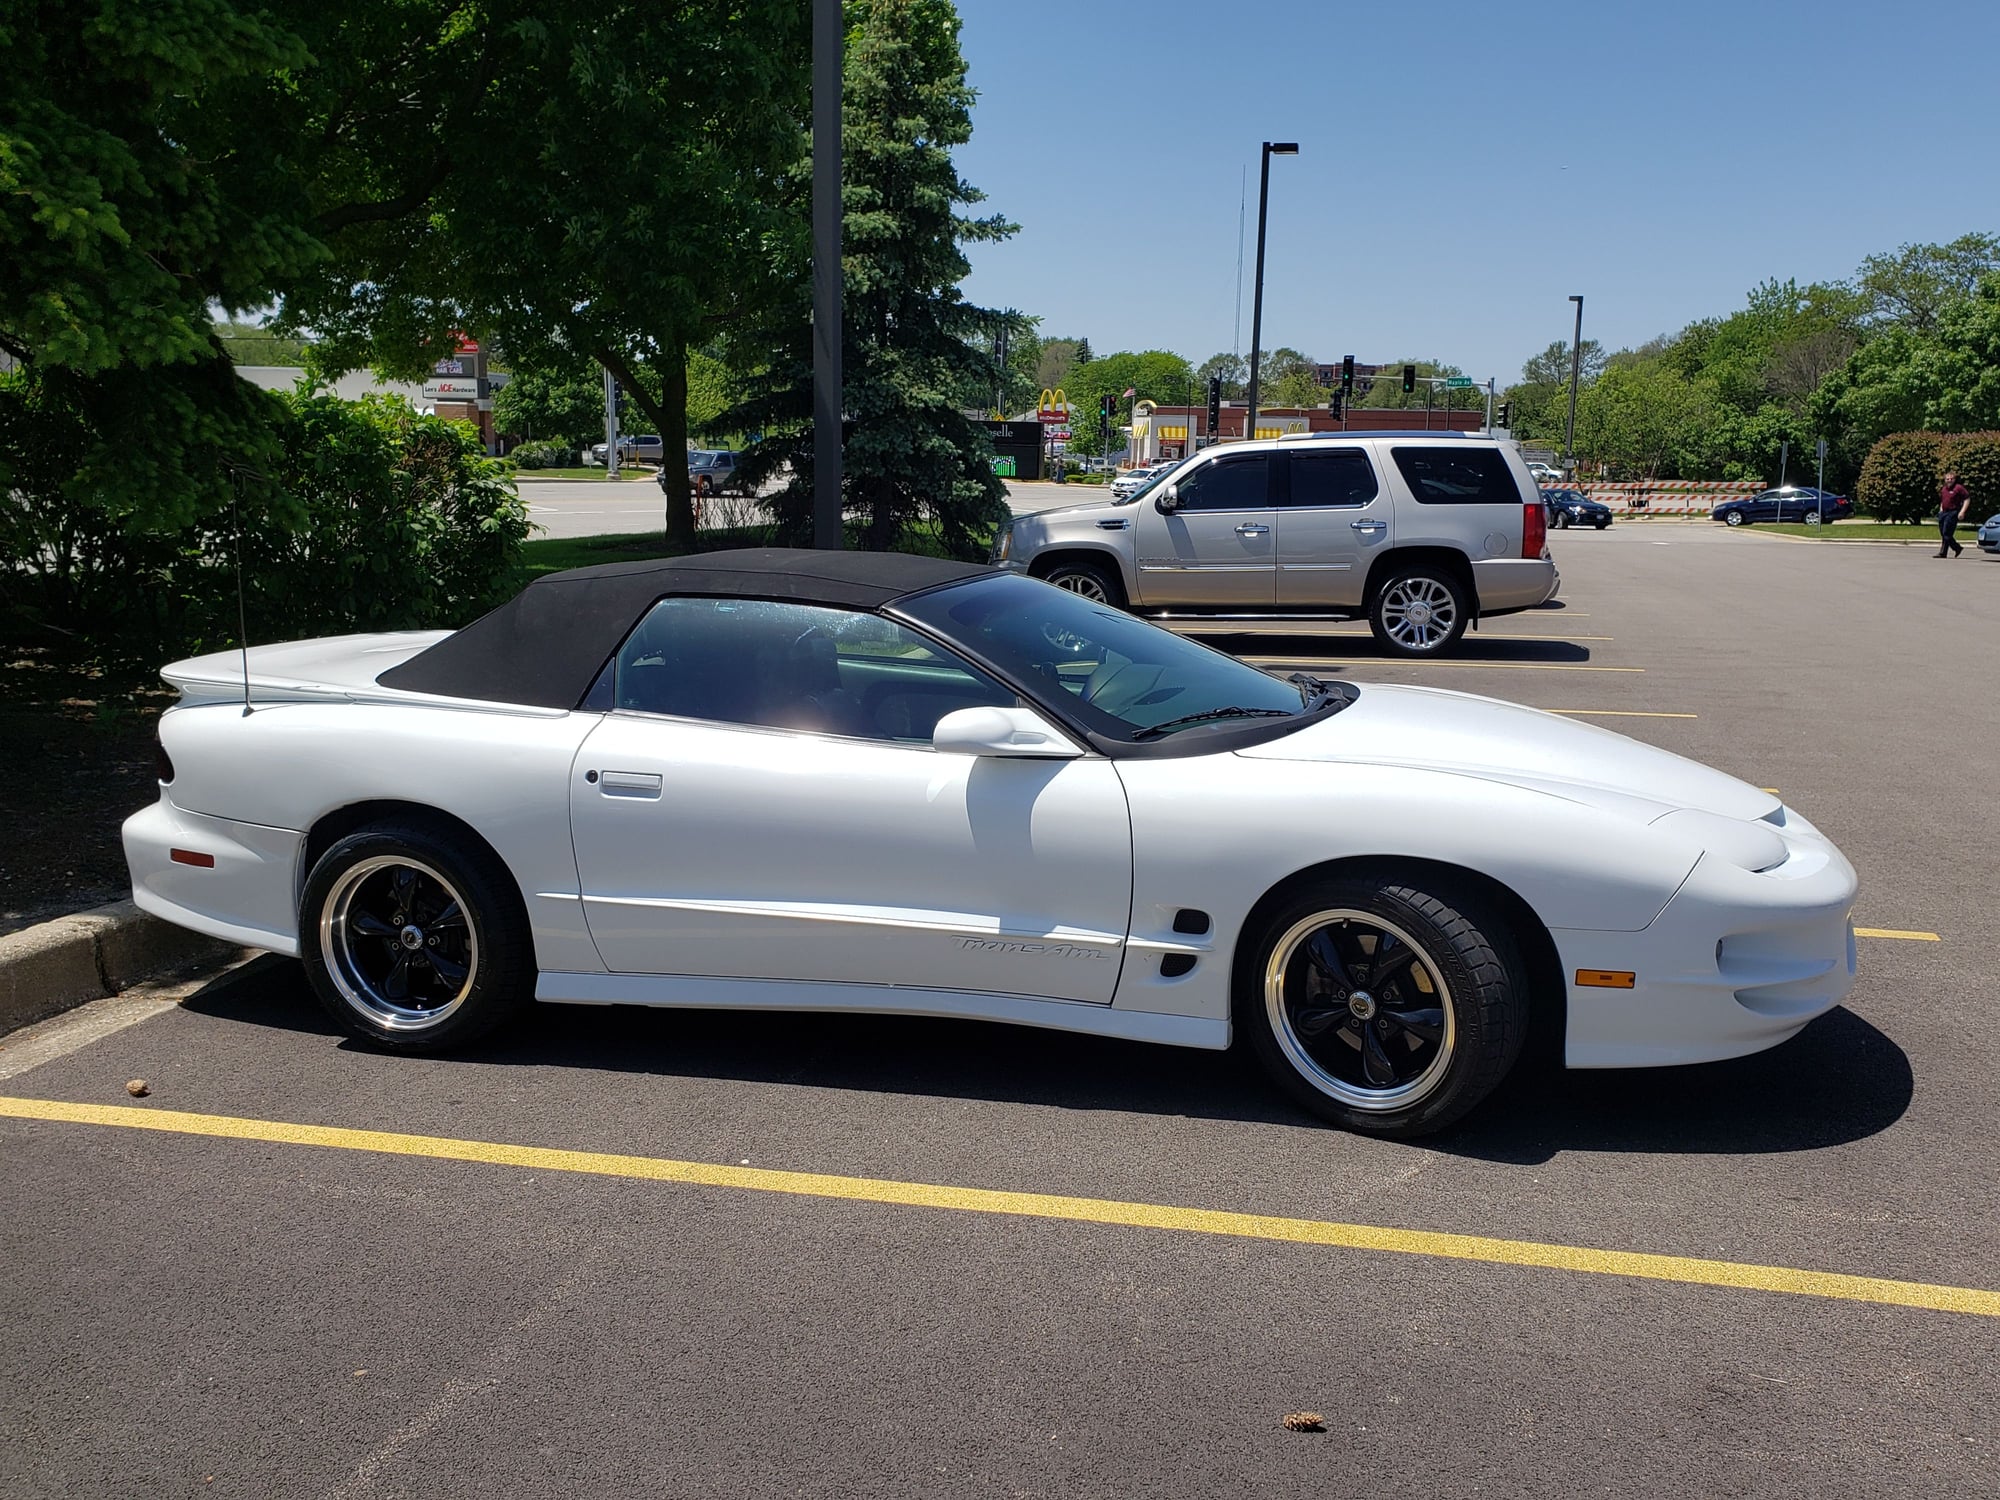 1998 Pontiac Firebird - 1998 Pontiac Trans am convertible unmolested all stock - Used - VIN 2G2FV32GXW2219177 - 119,000 Miles - 8 cyl - 2WD - Automatic - Convertible - White - Hanover Park, IL 60133, United States